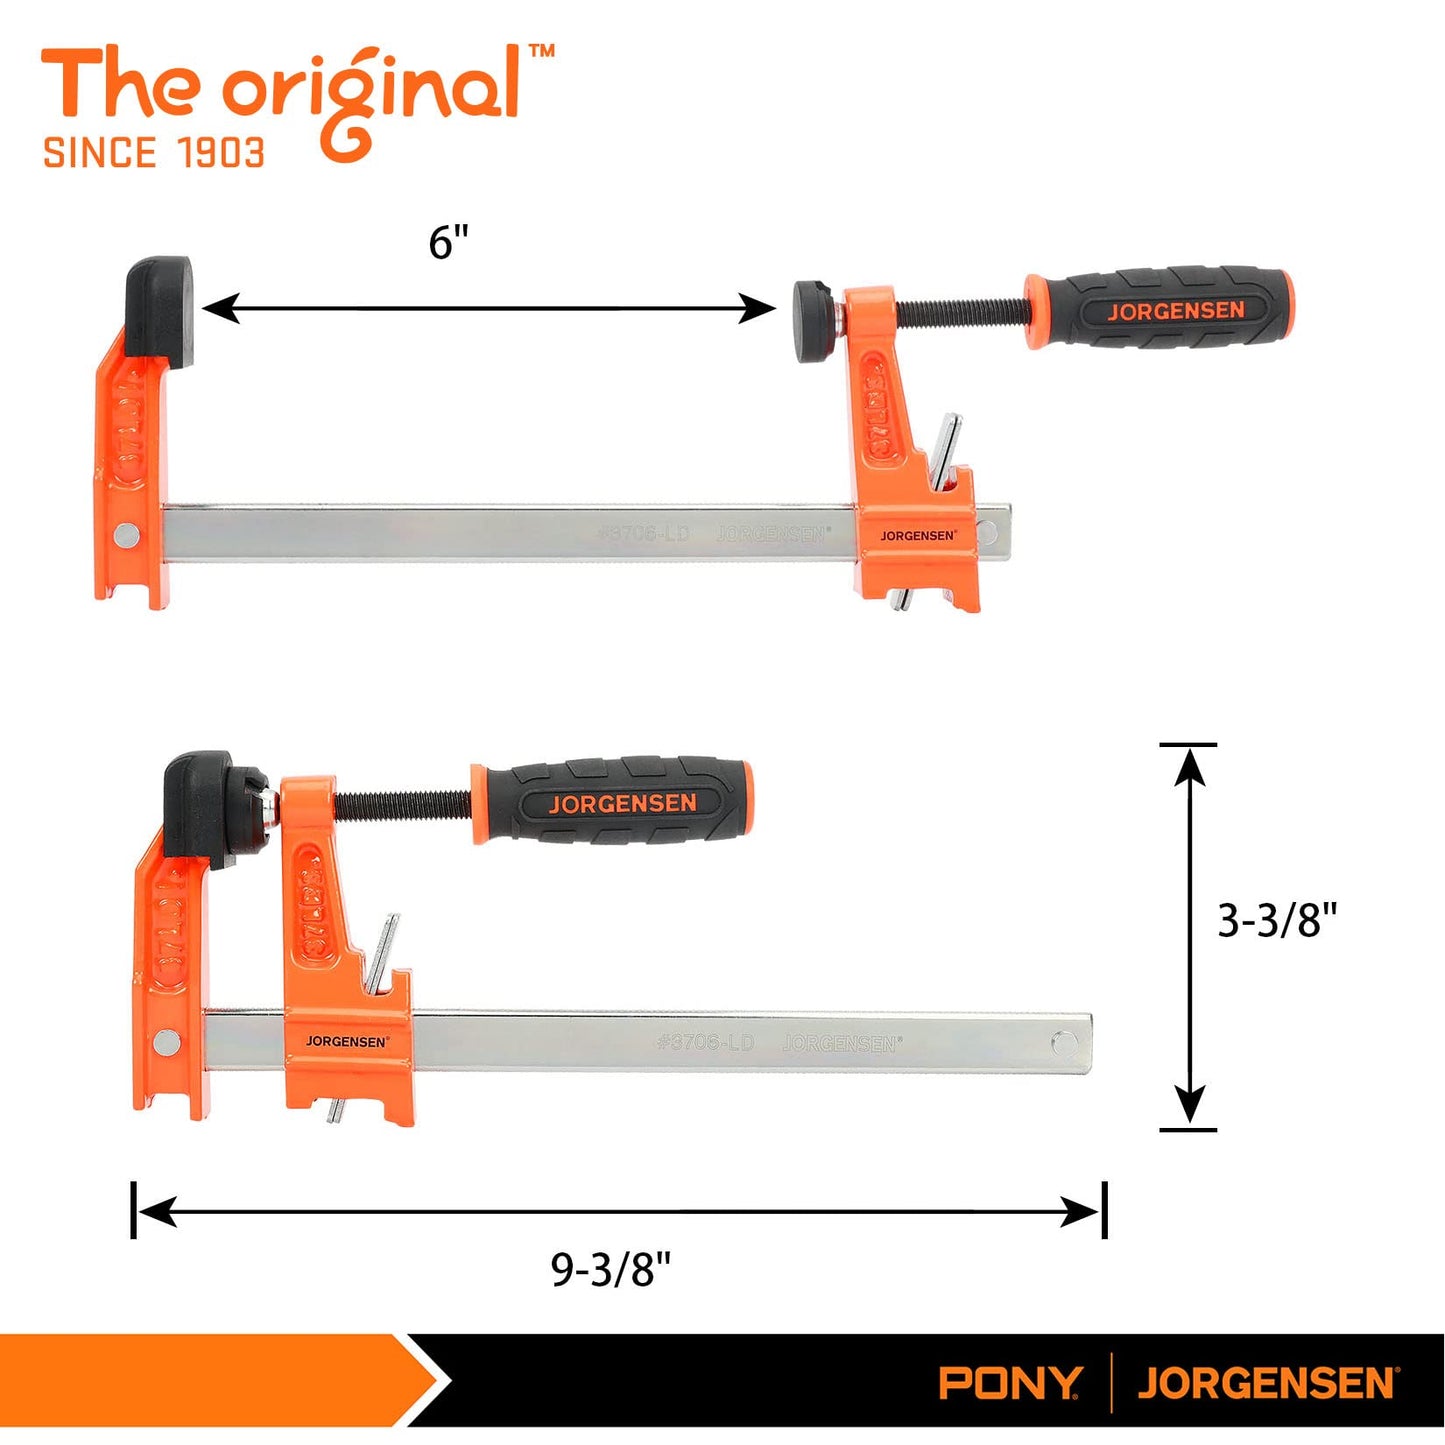 Jorgensen 6 inch Bar Clamp Set, 4 Pack Steel F Clamp Light Duty, 300 lbs Load Limited, for Woodworking, Metalworking, DIY